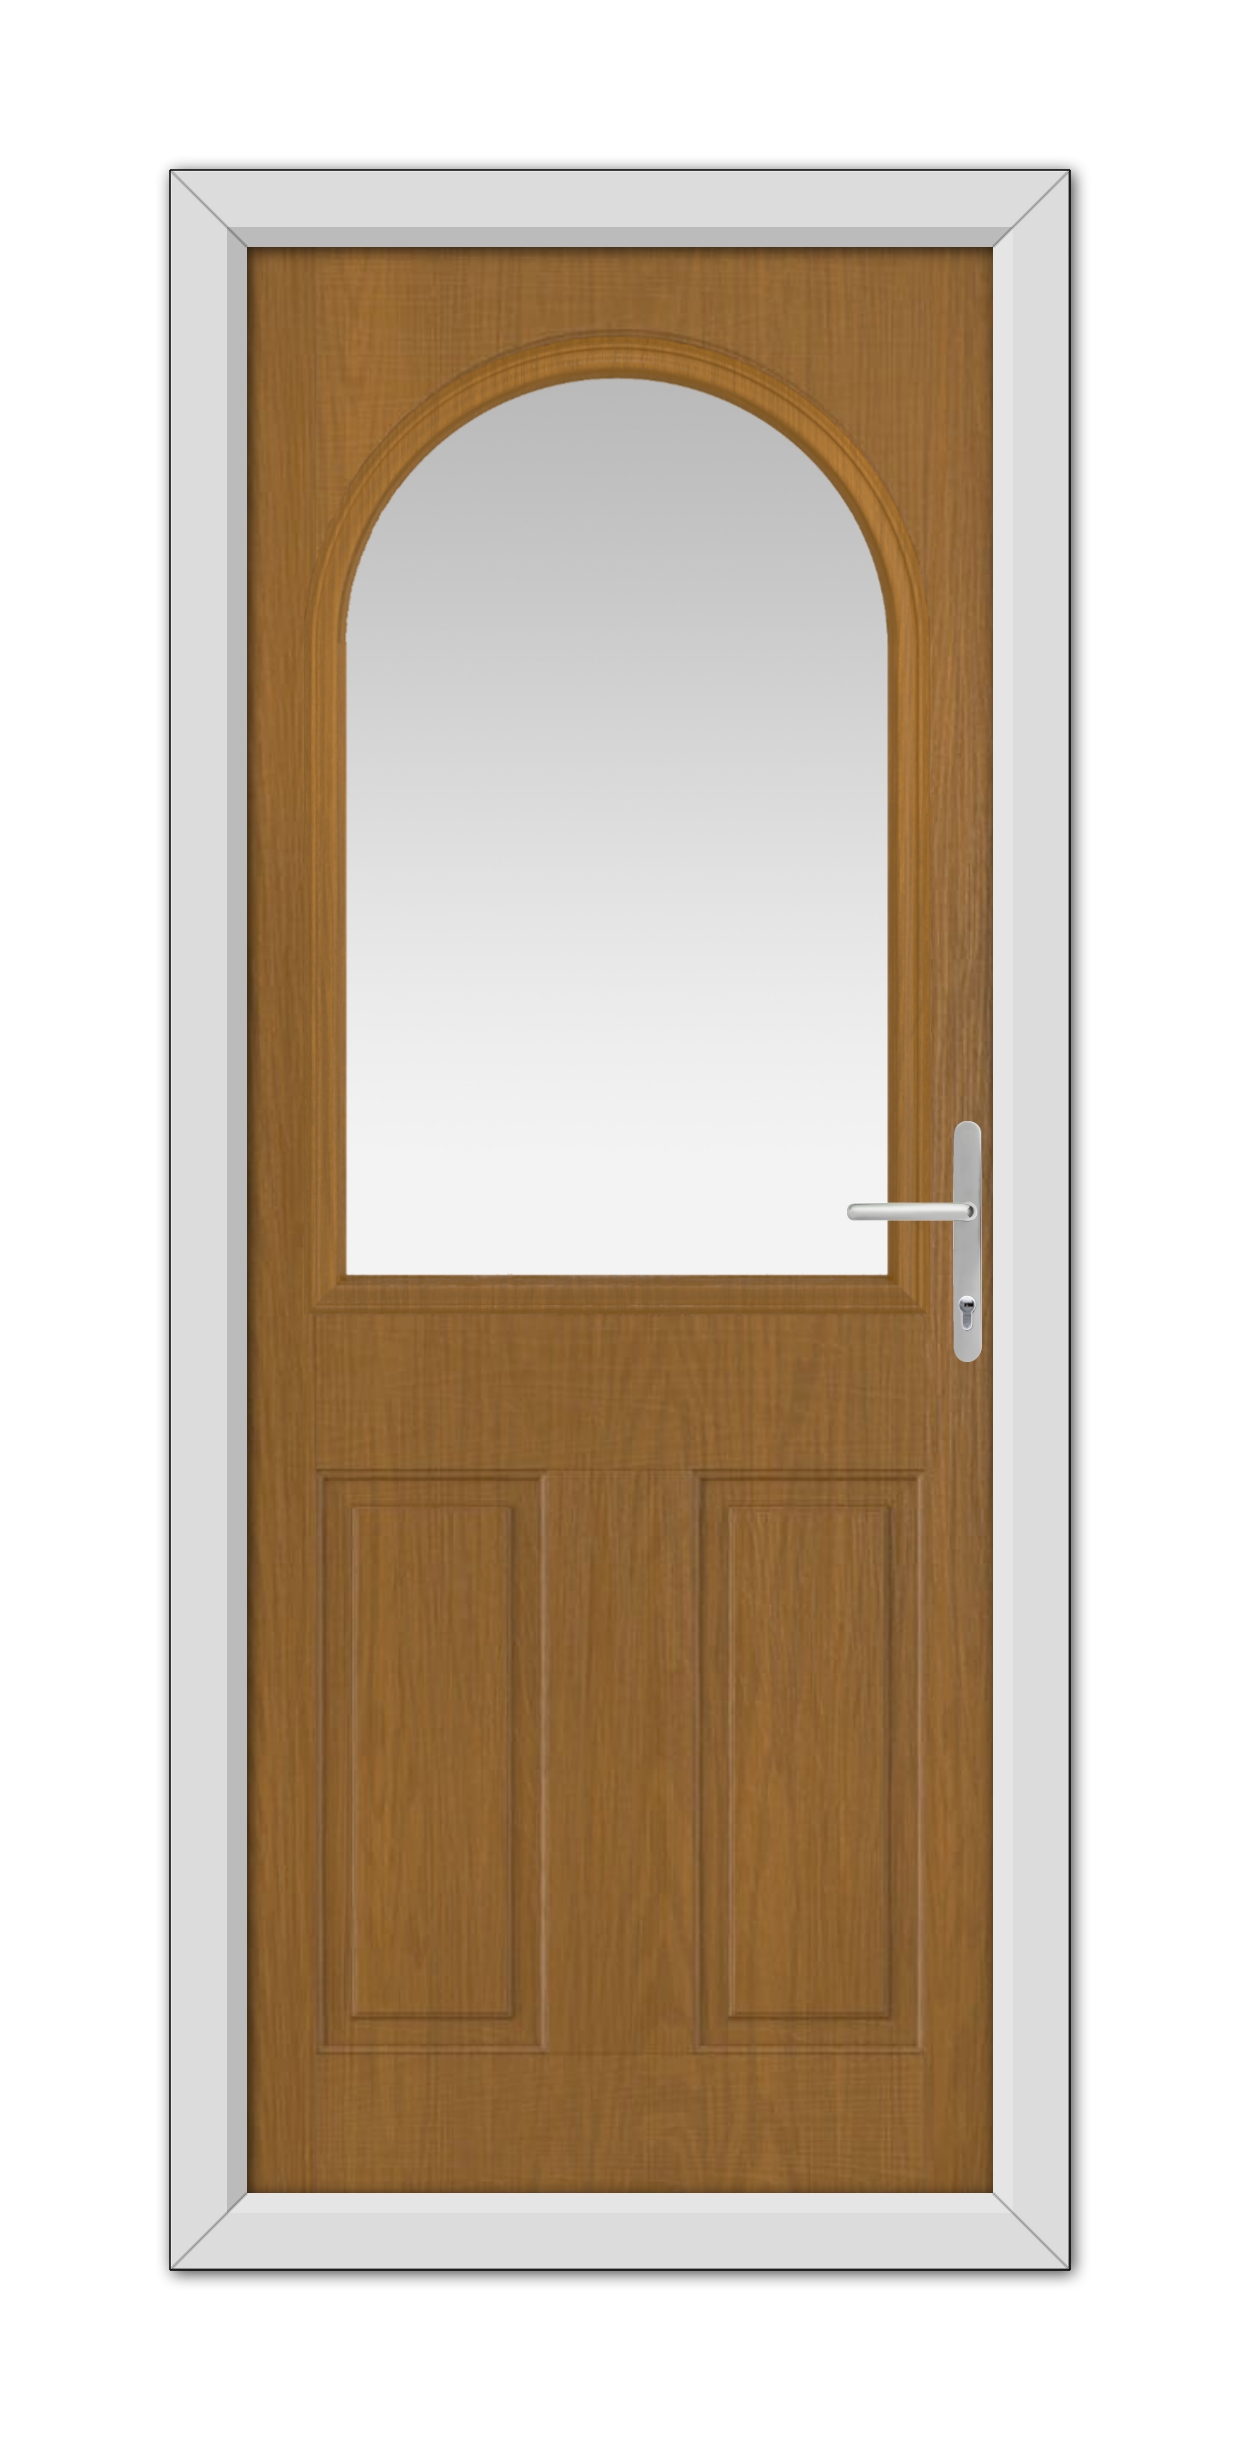 A Oak Grafton Composite Door 48mm Timber Core with a white frame and arched glass panel at the top, equipped with a modern handle on the right side.